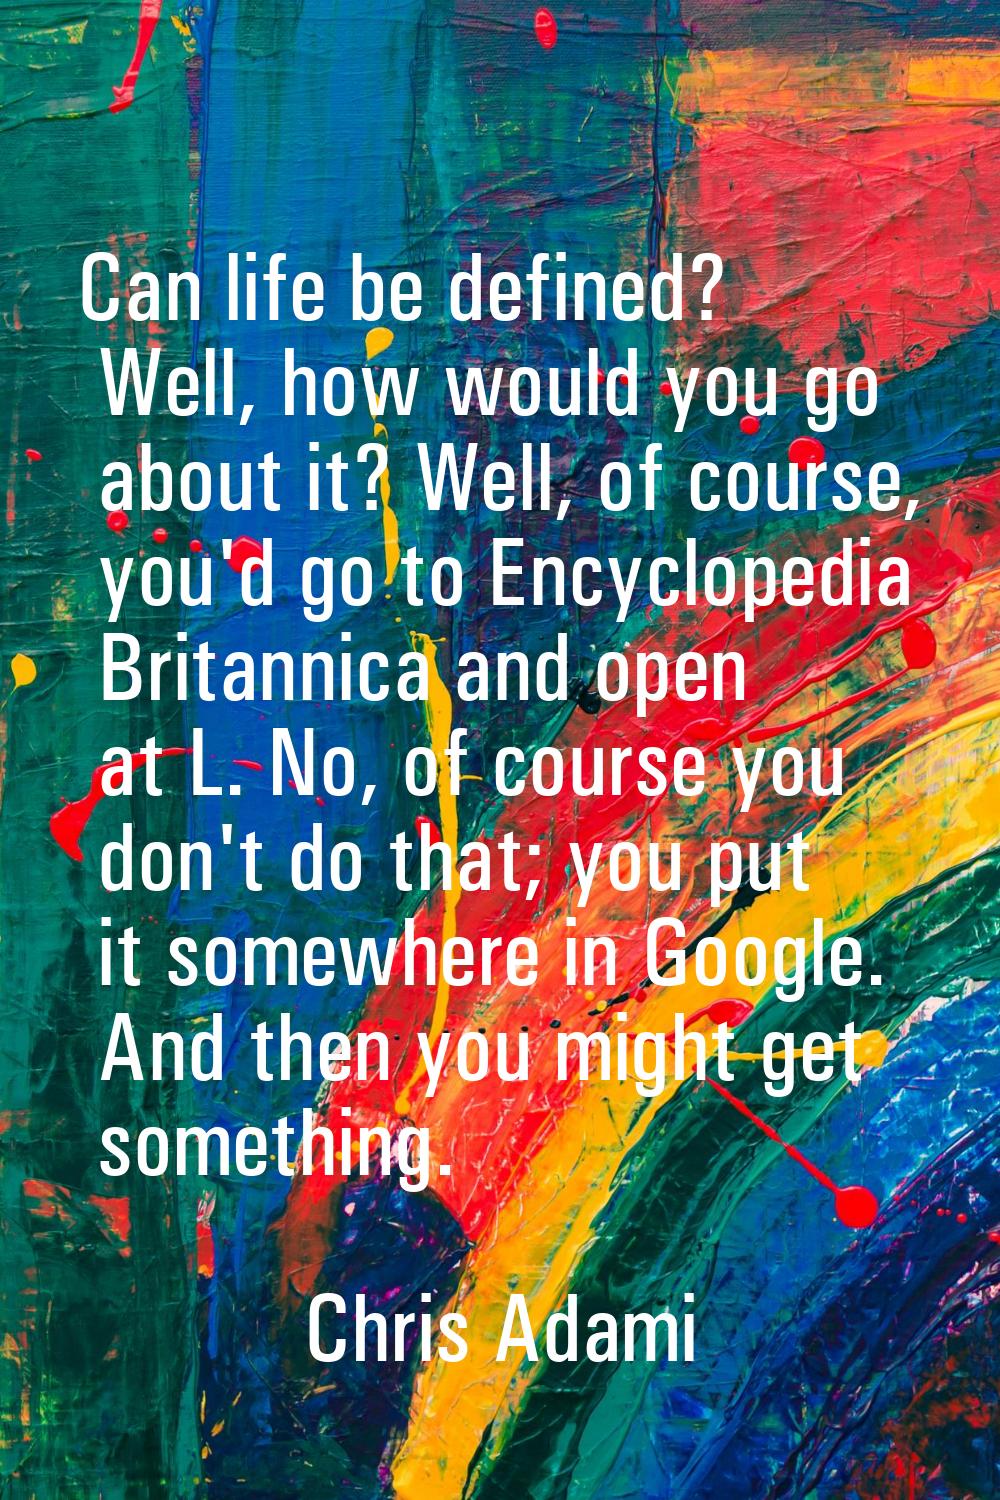 Can life be defined? Well, how would you go about it? Well, of course, you'd go to Encyclopedia Bri